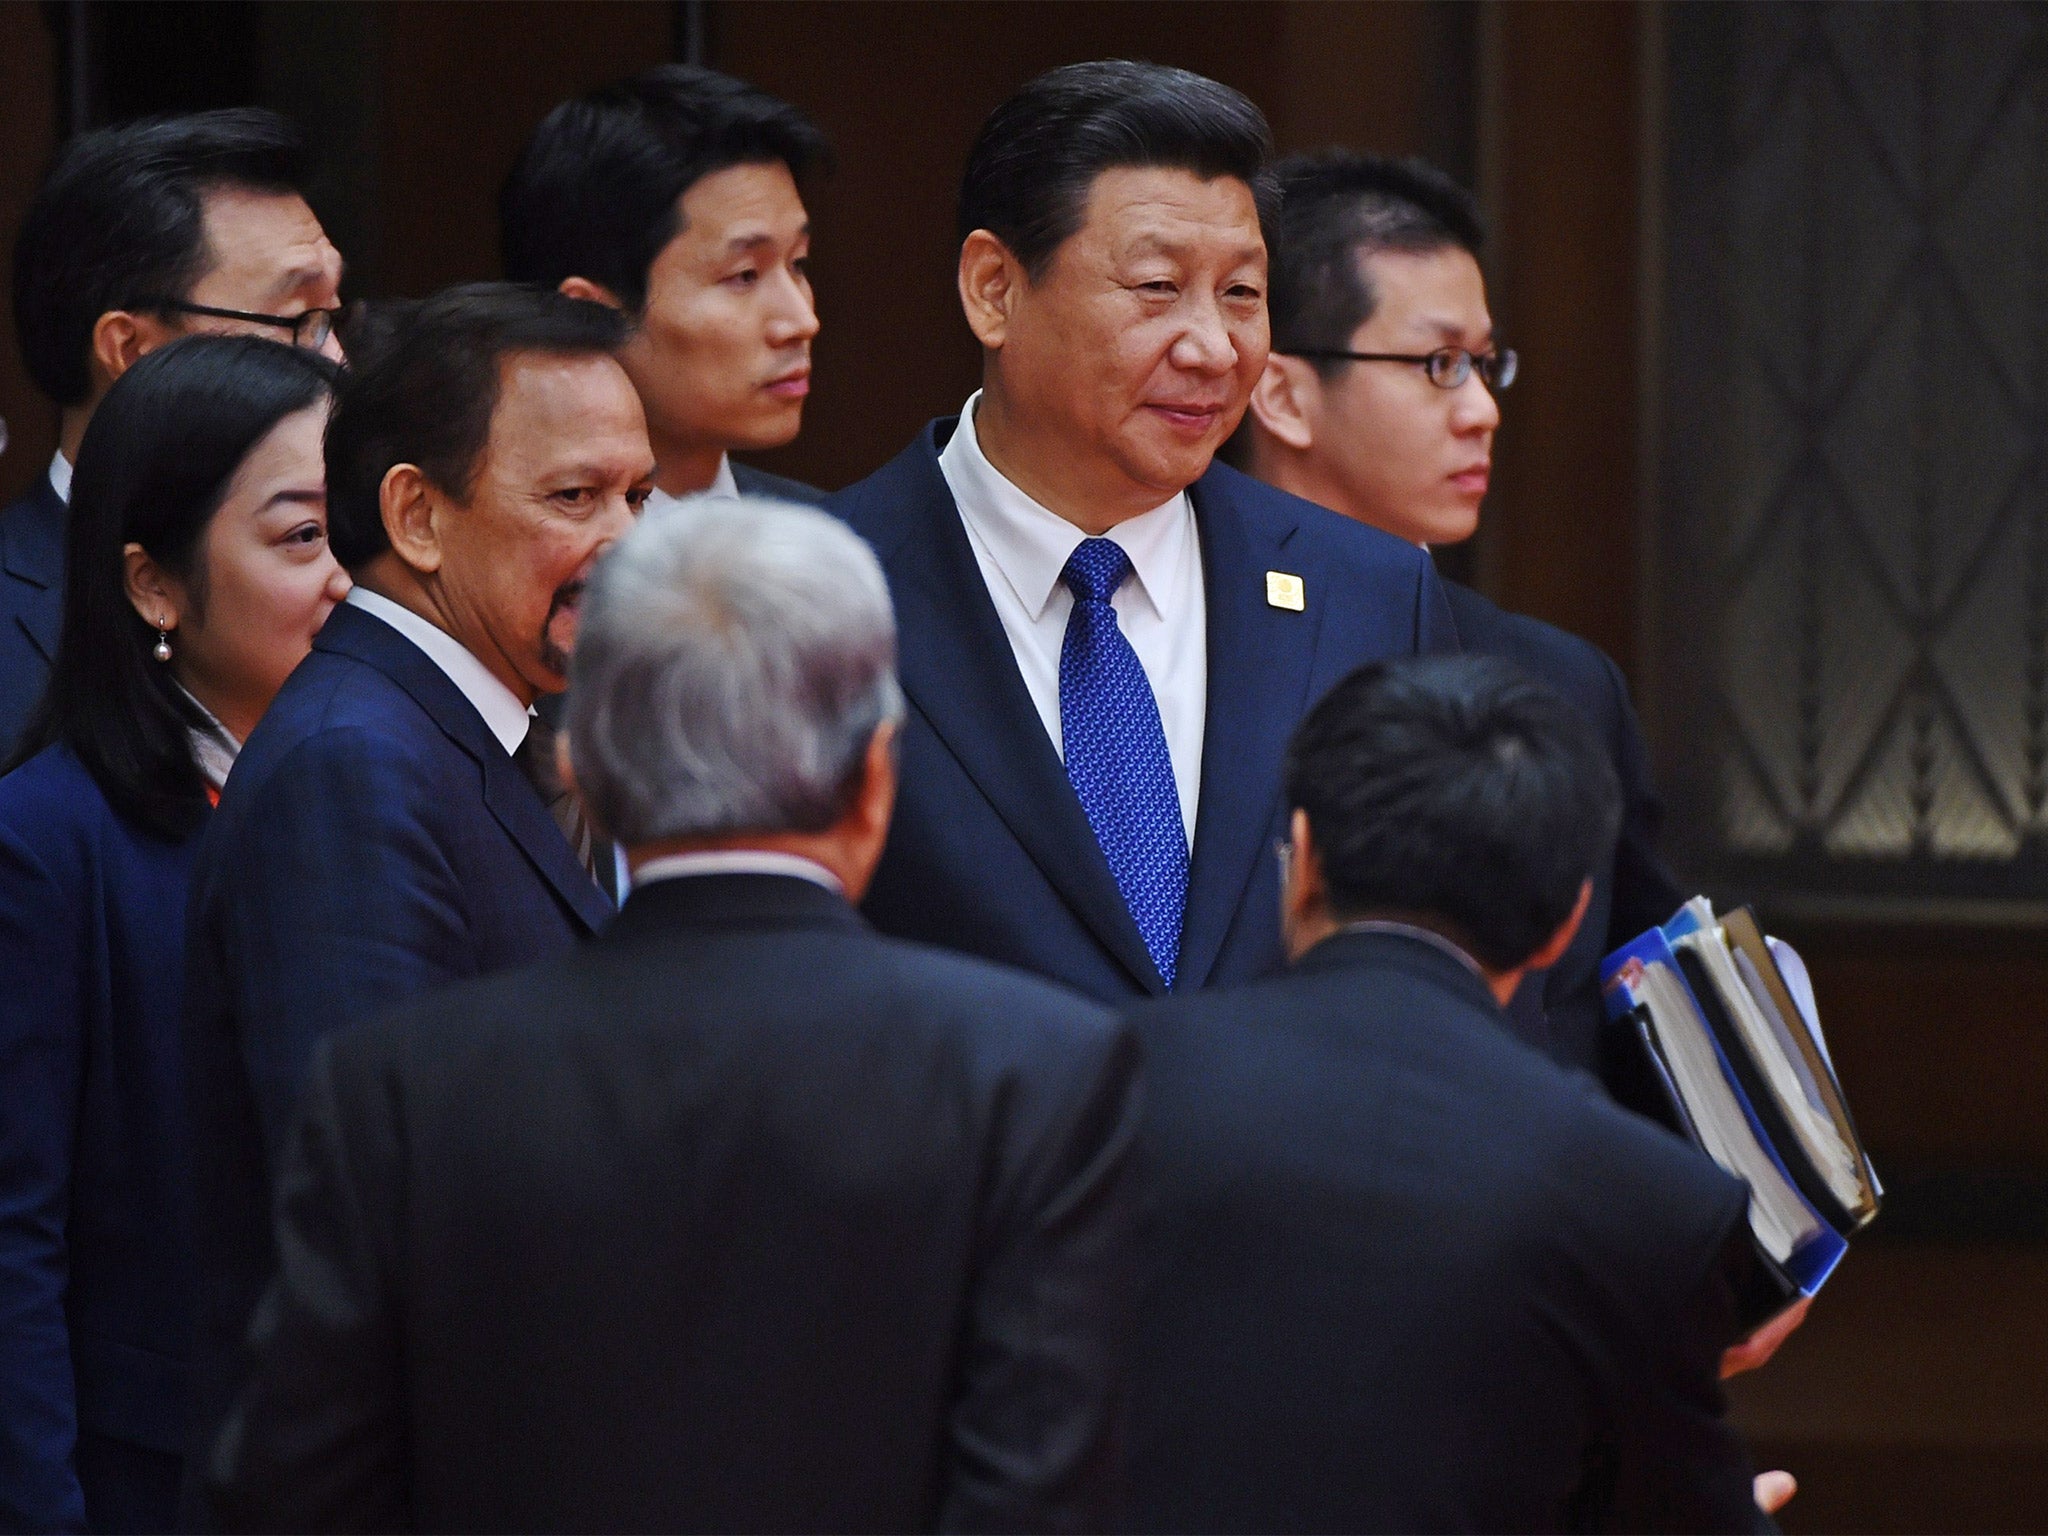 China's President Xi Jinping with leaders of other APEC economies